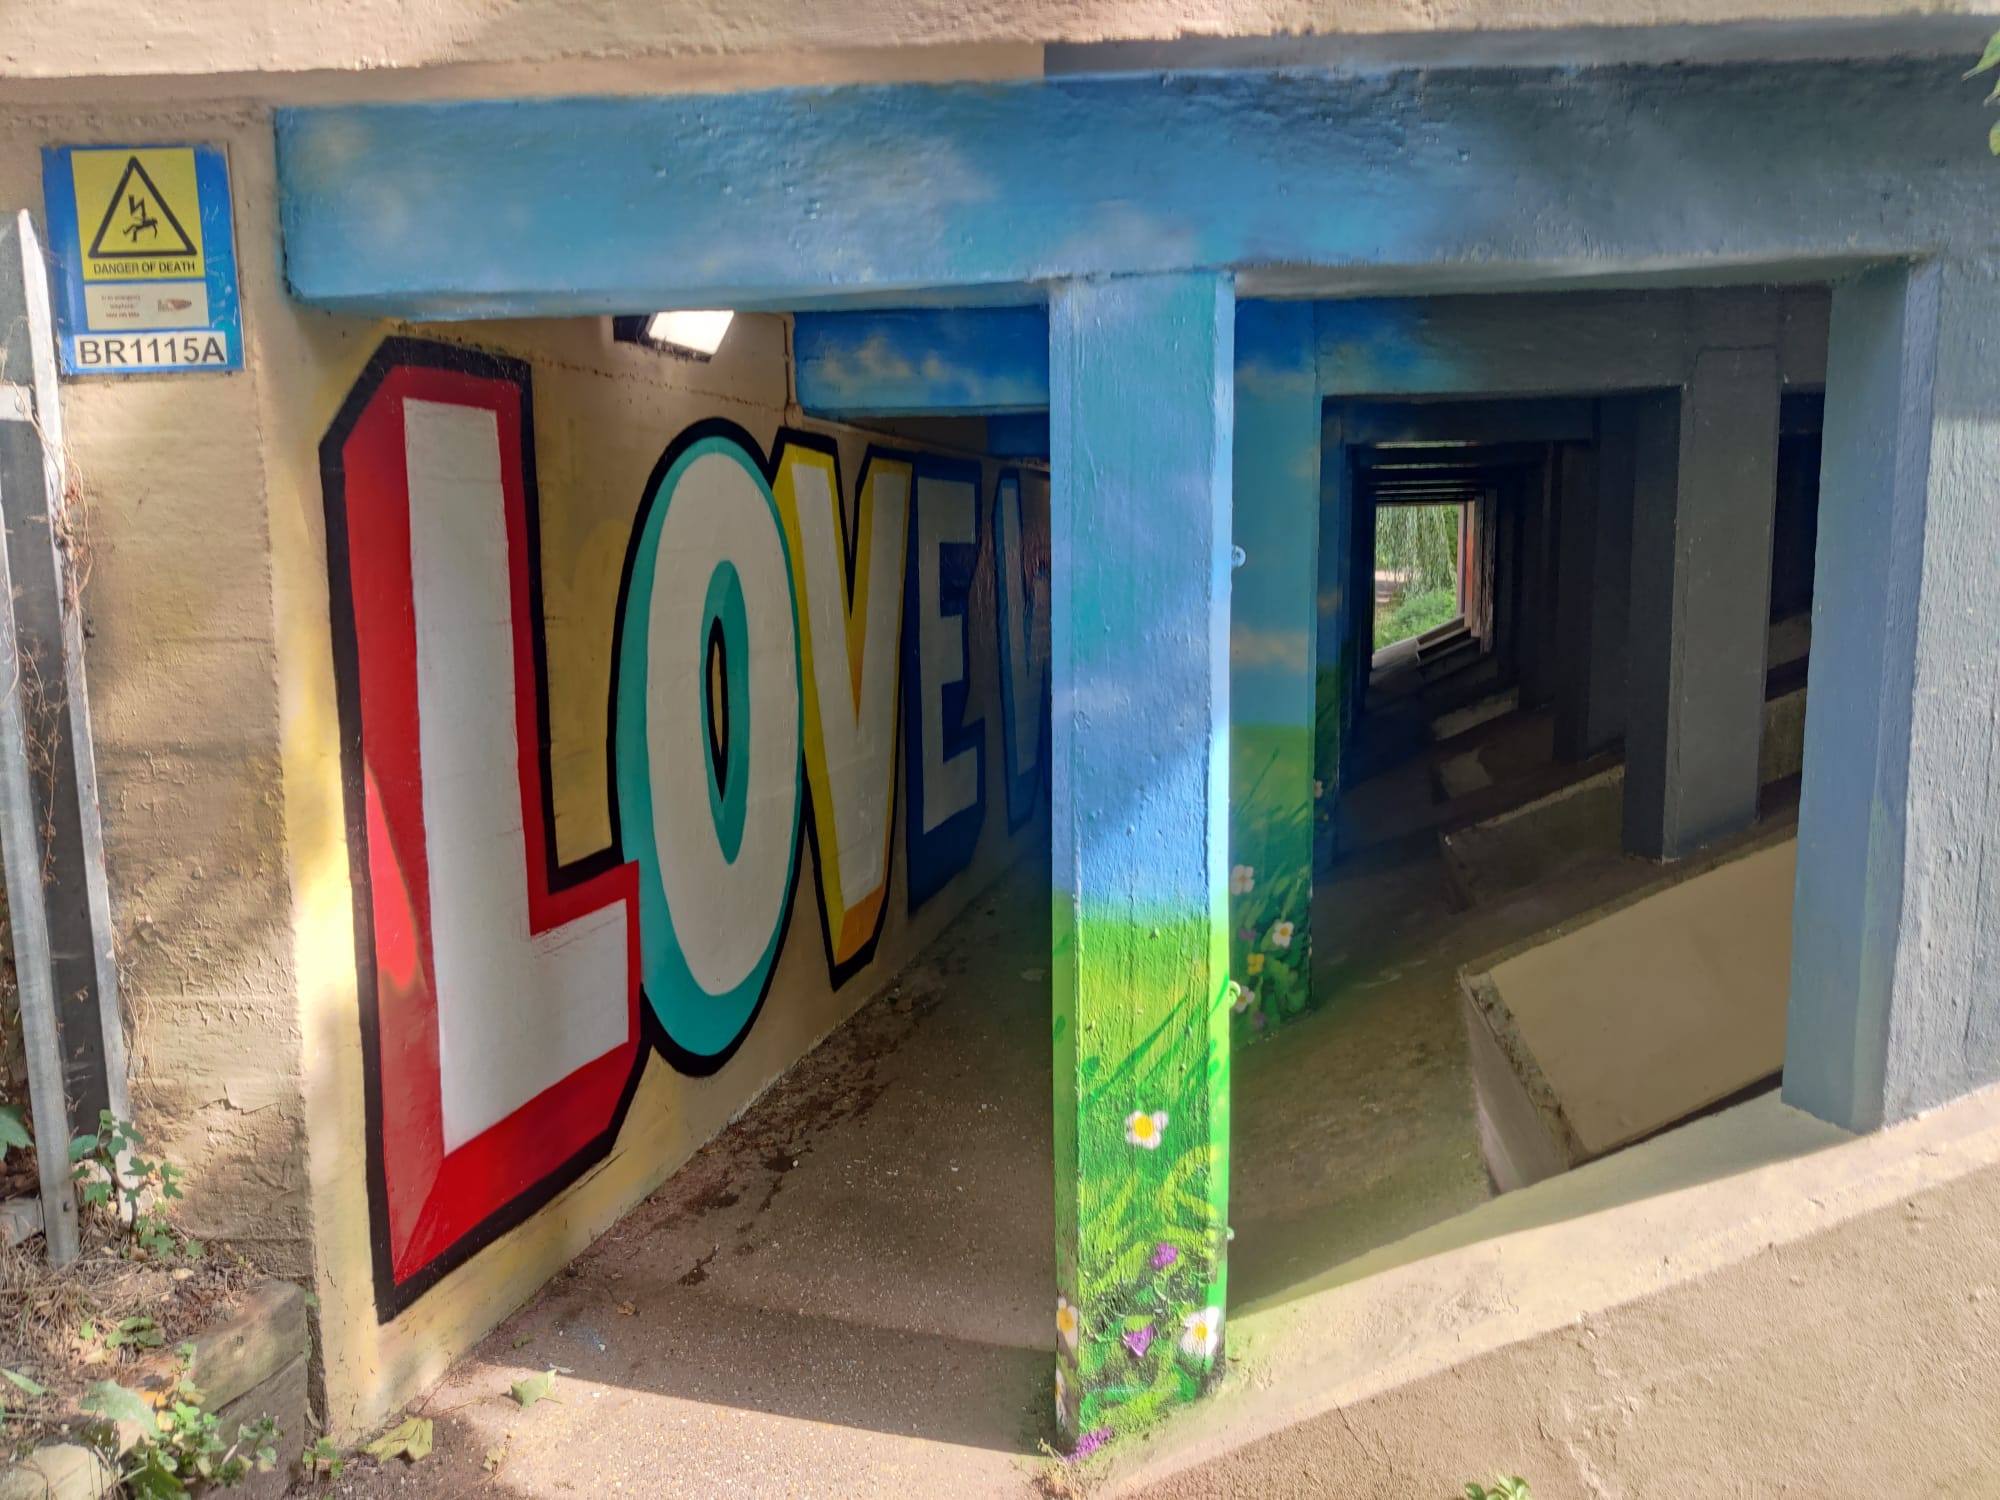 Kingsmead Road bridge after being cleaned and decorated with street art